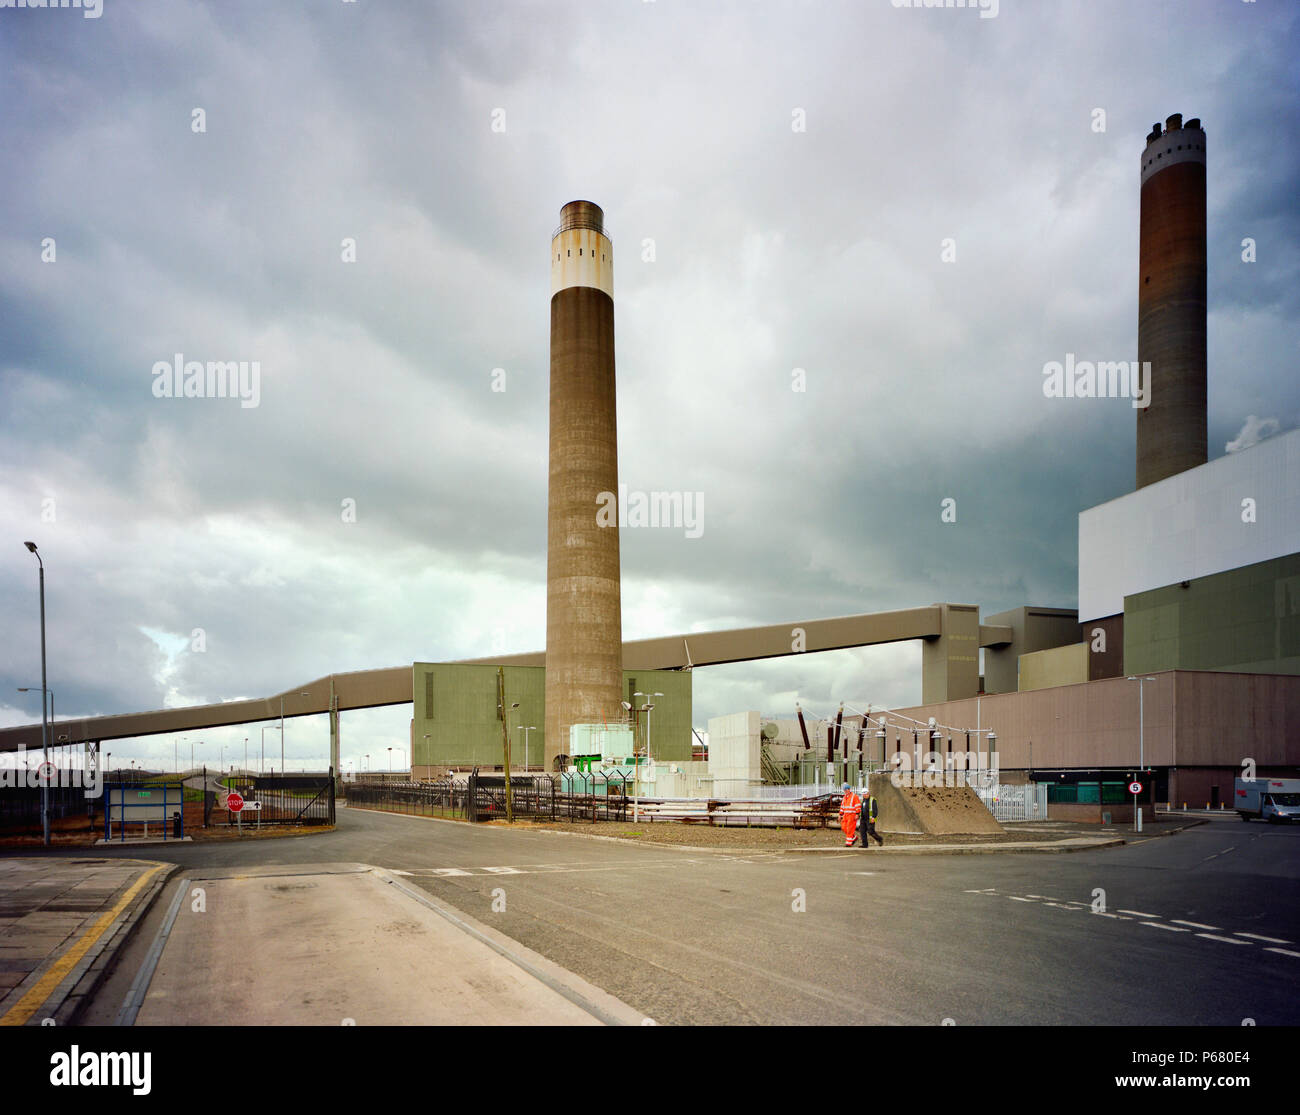 Kilroot power station near Carrickfergus in Northern Ireland.The station generates 520MW of electricity from a dual coal/oil fired plant. The plant is Stock Photo